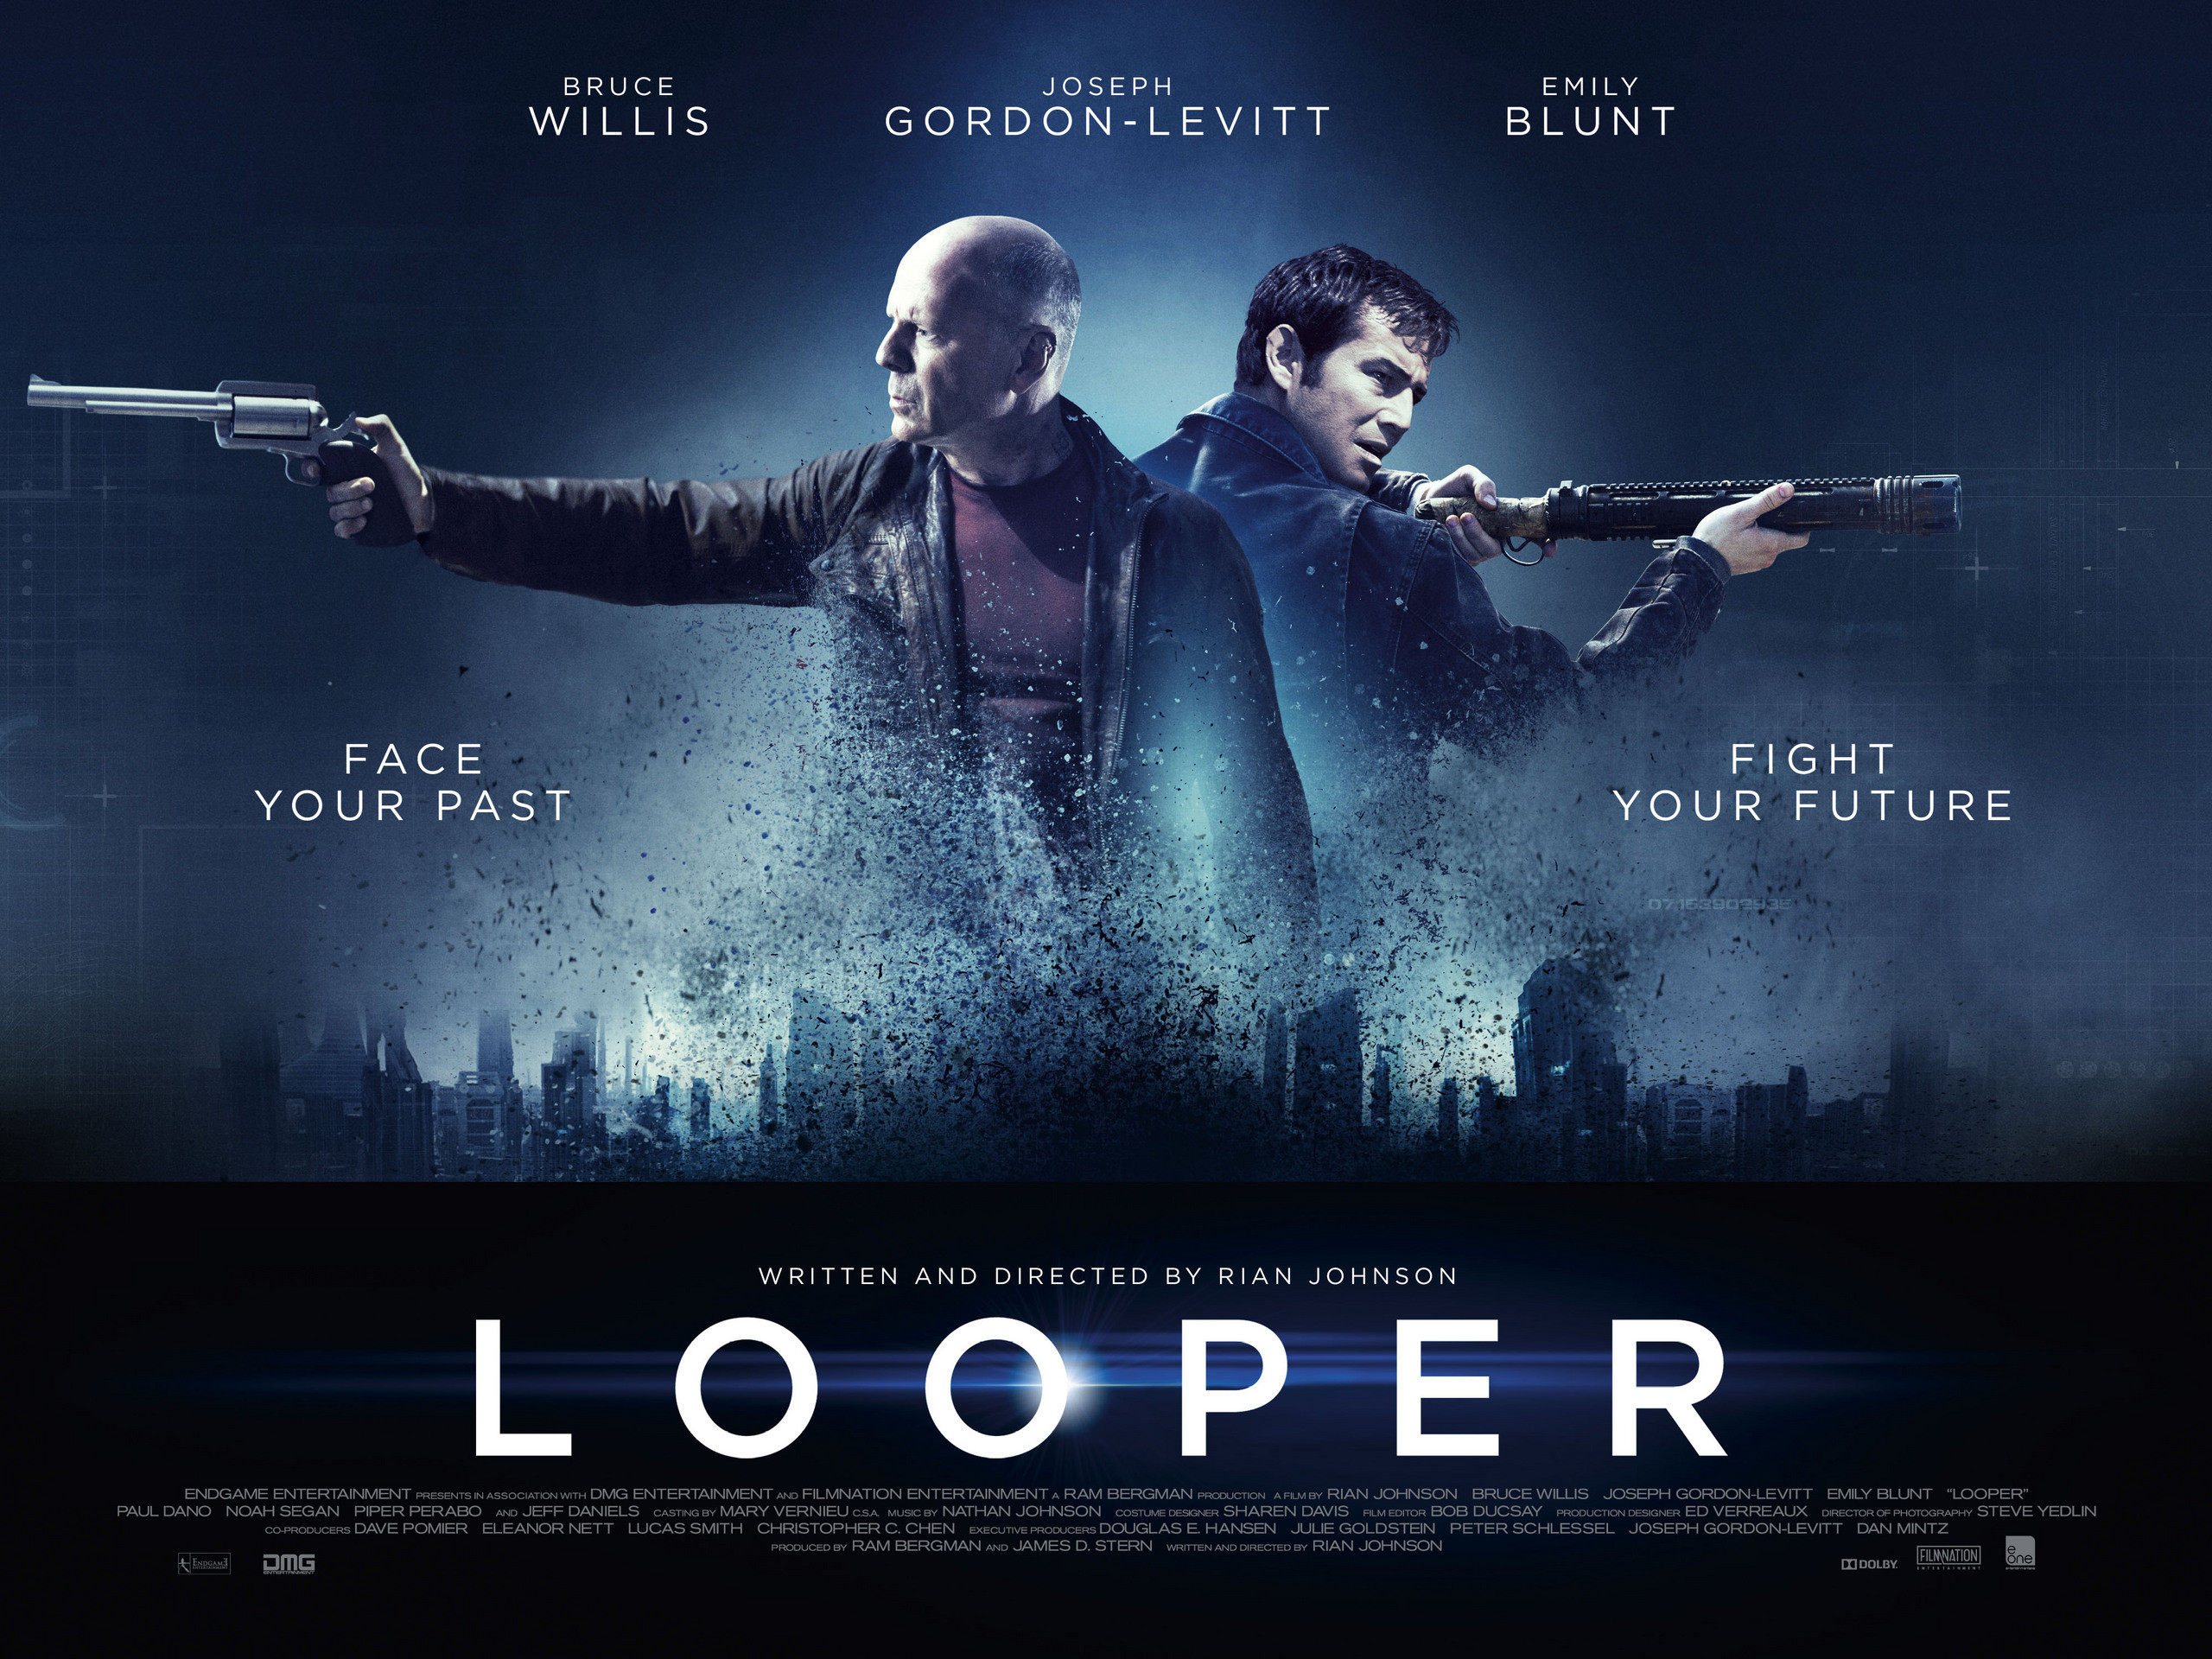 2560x1920 Looper images Looper Movie Poster HD wallpaper and background photos